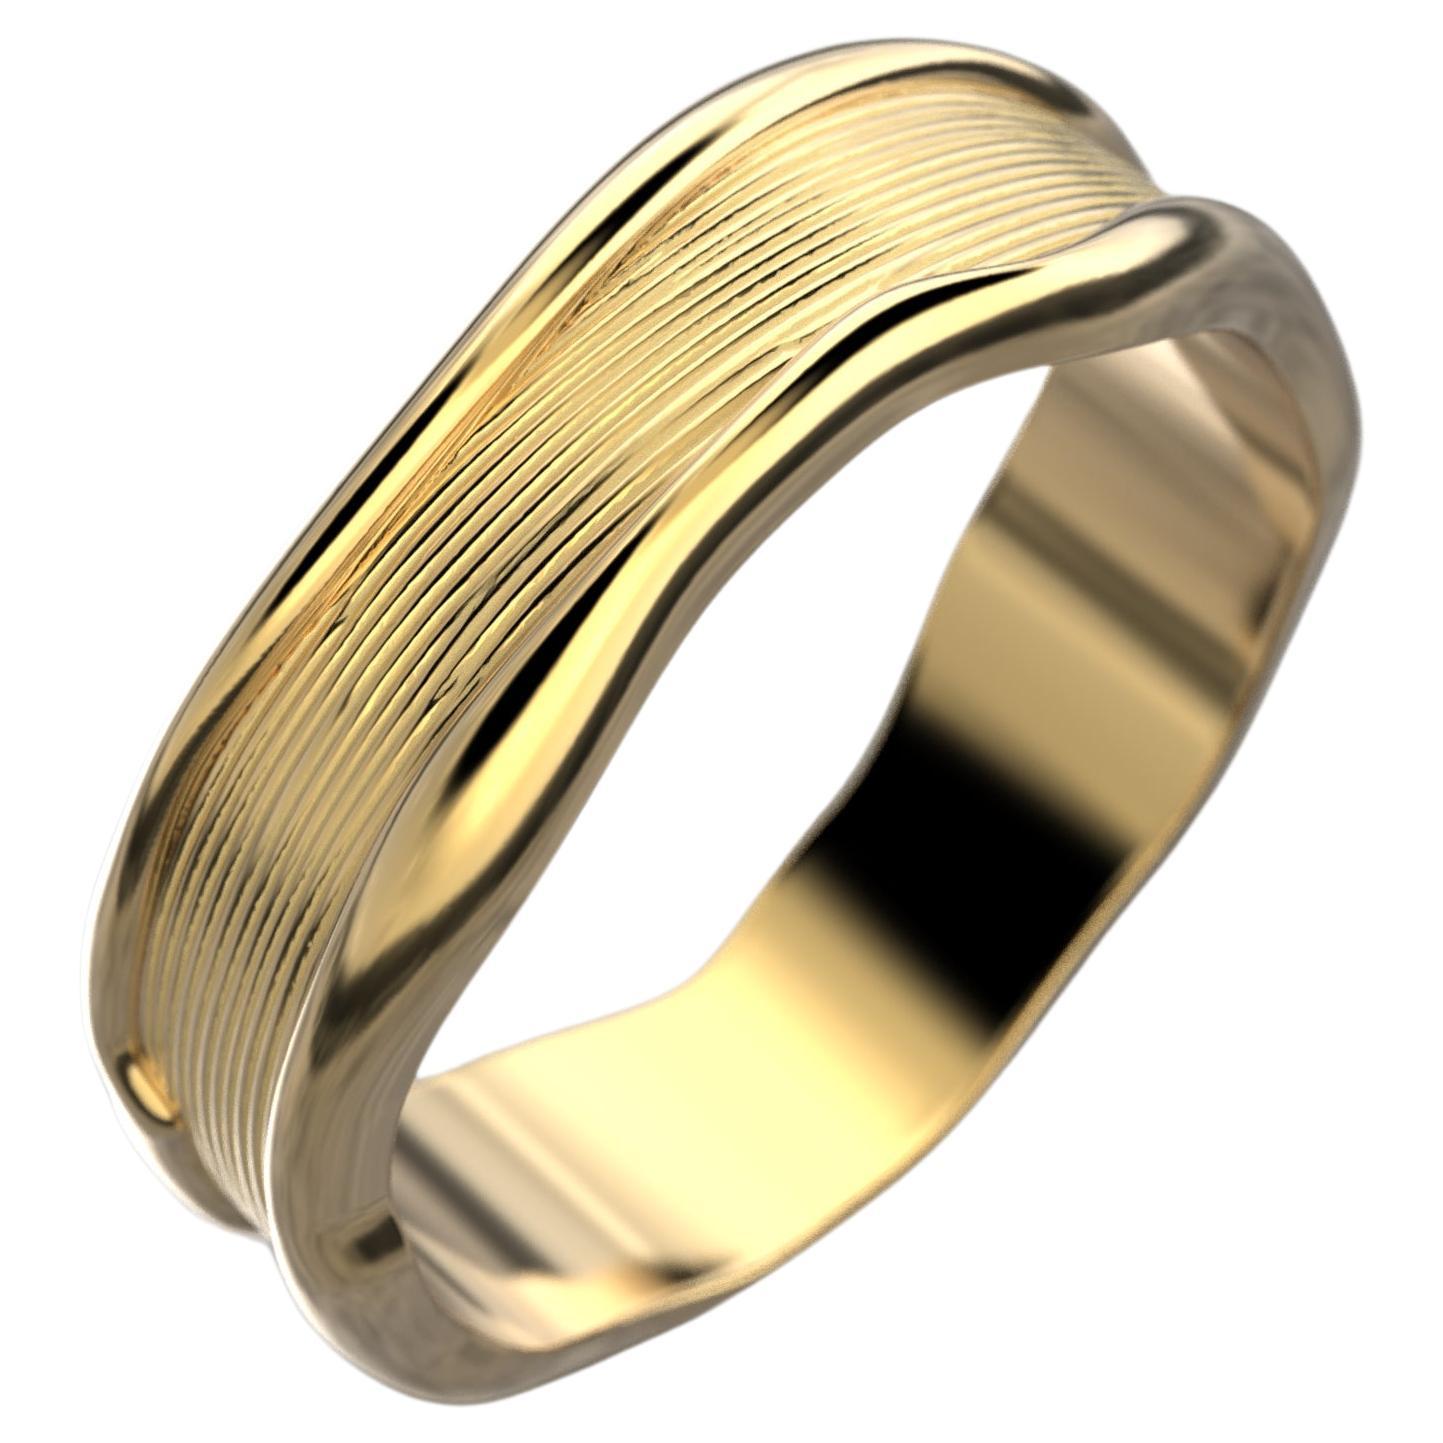 For Sale:  Unisex 18k Gold Band Ring with Hand-Engraved Organic Design Made in Italy